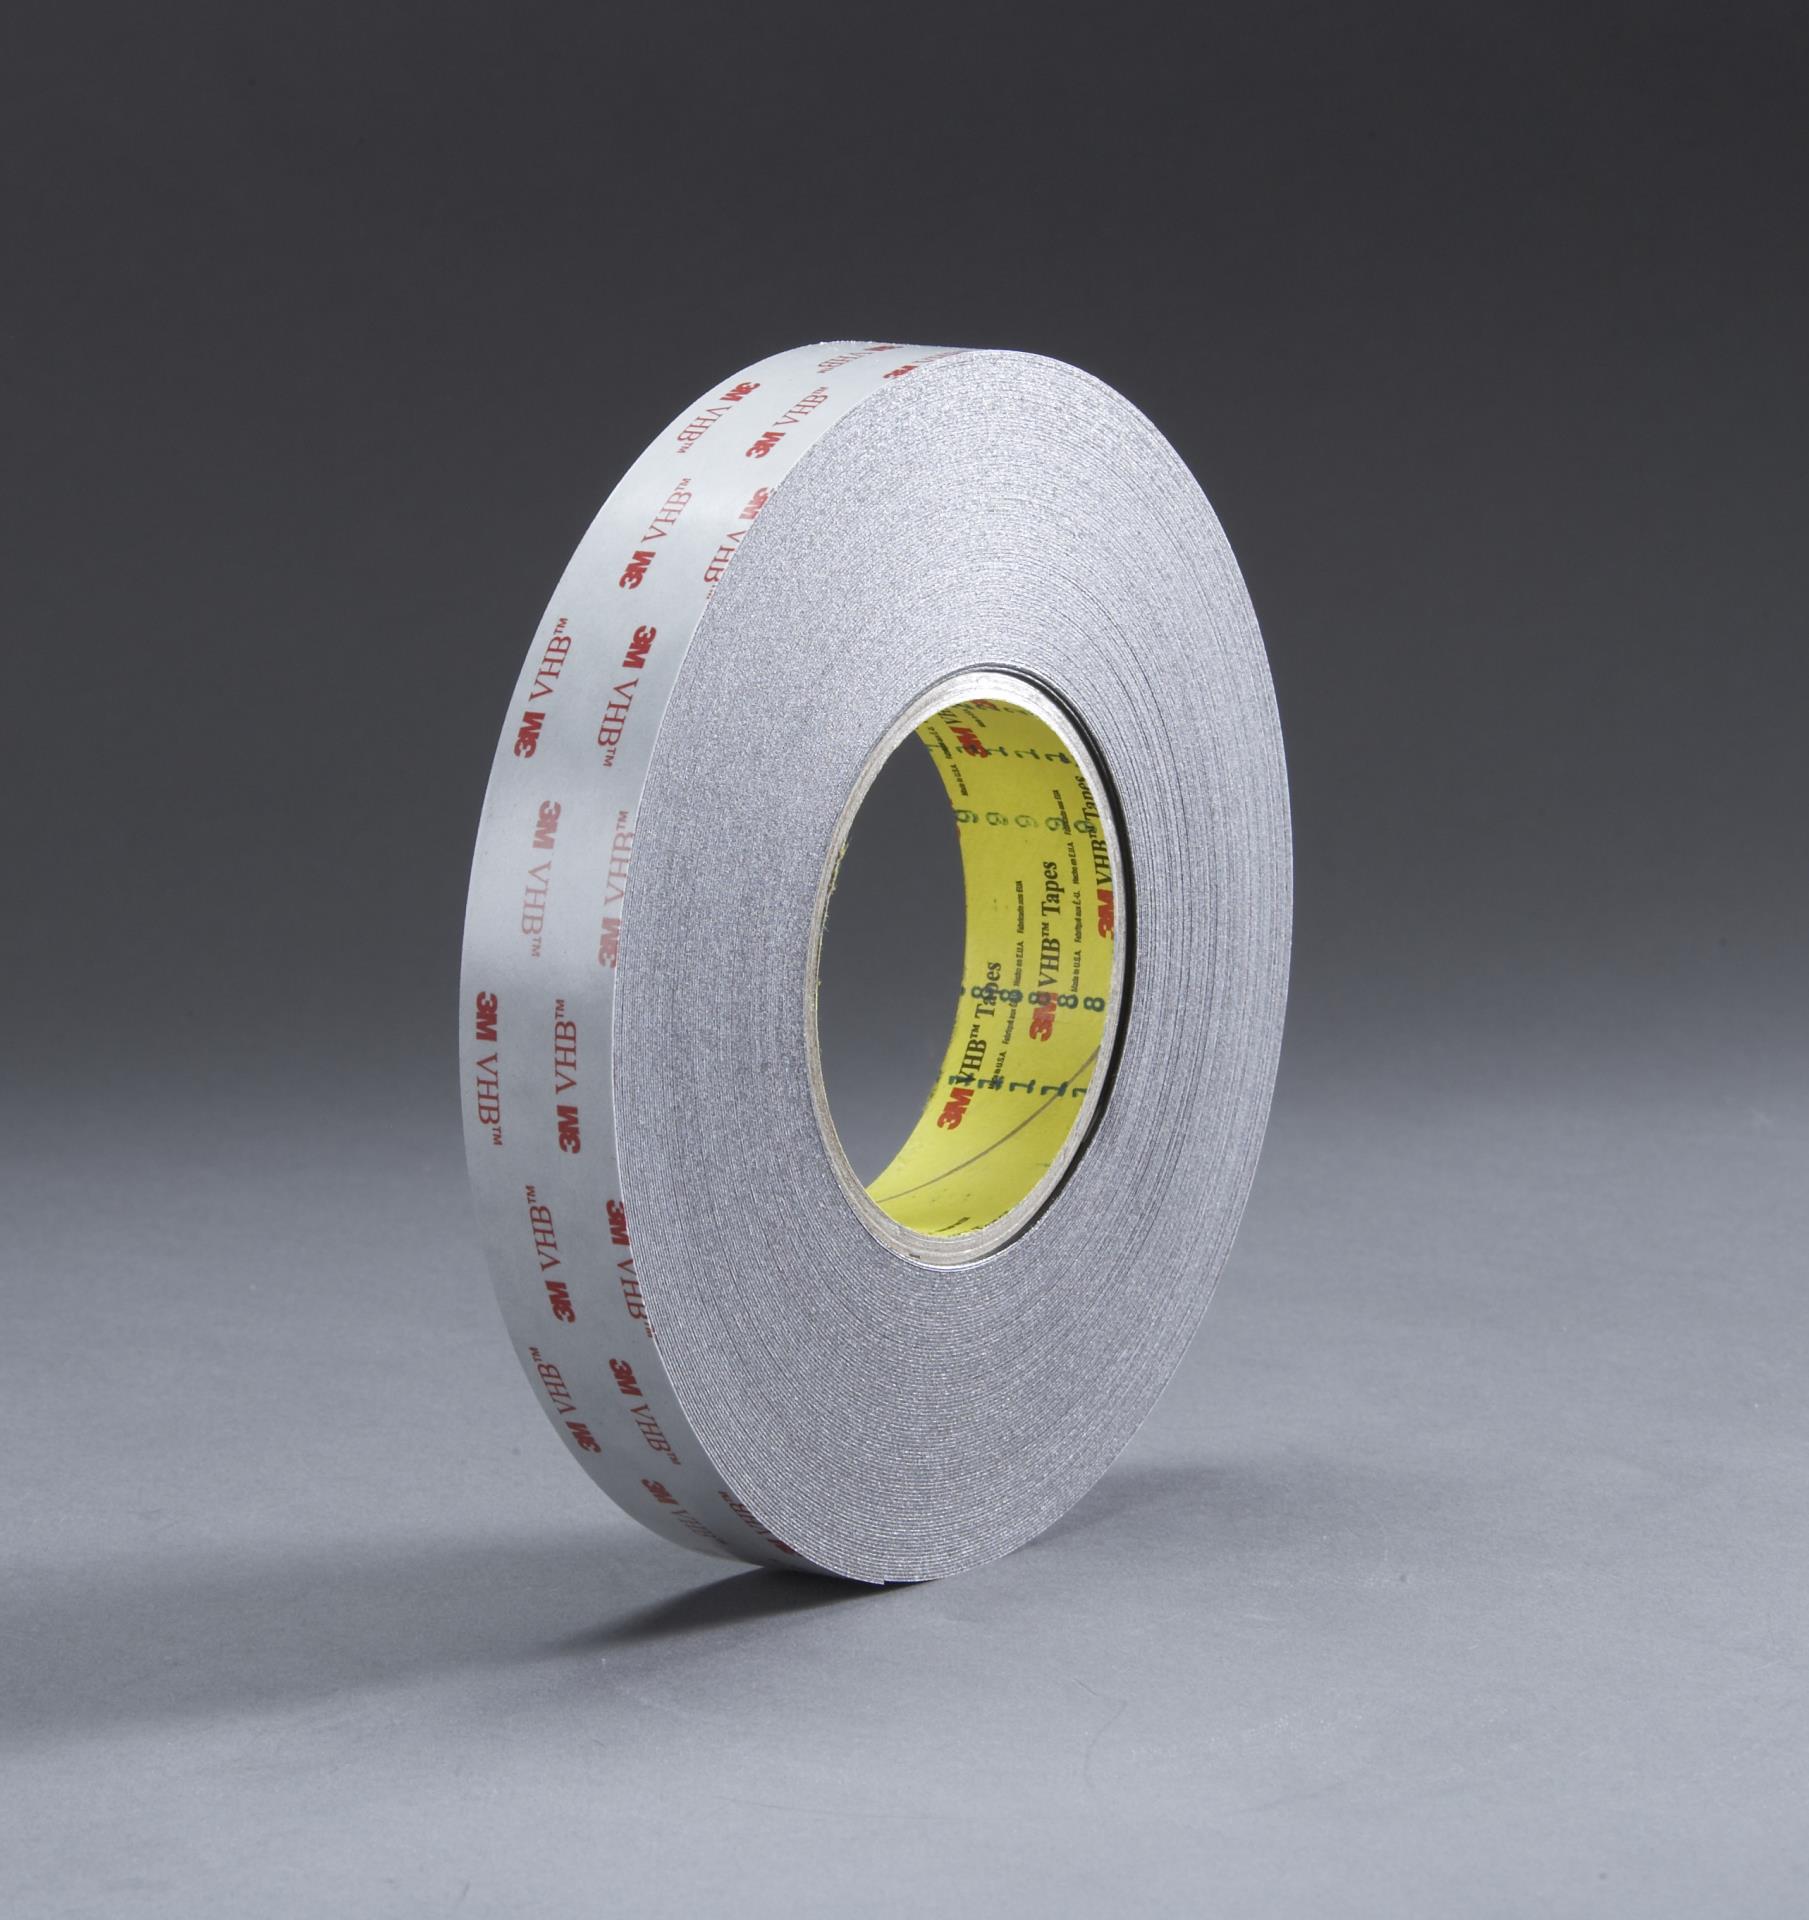 White Poly Tape 4"x60yds 12 Roll Case / $13.50 Per Roll 